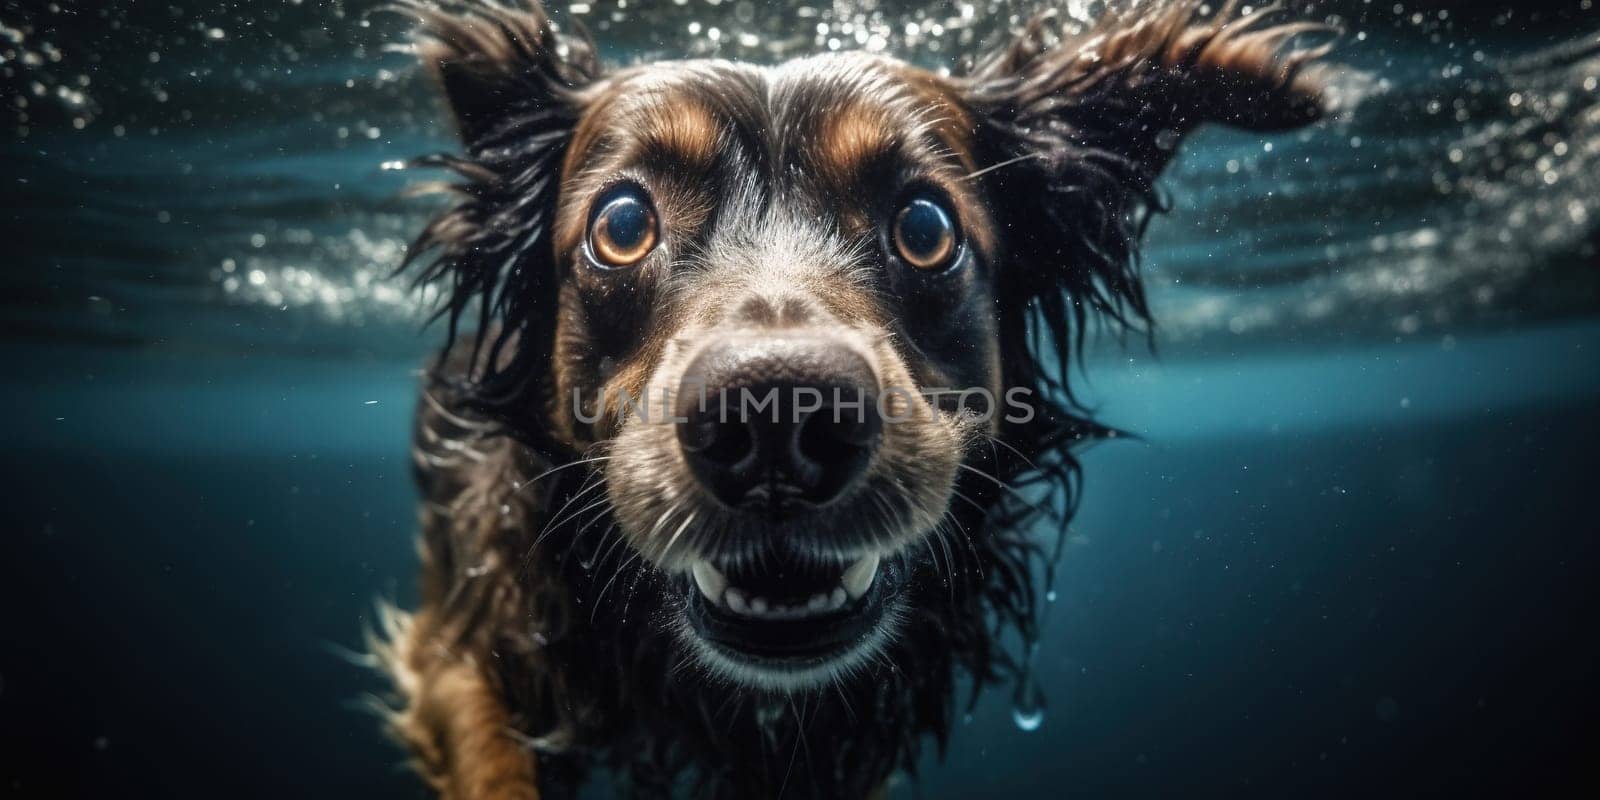 Underwater closeup reveals dog, muzzle covered in bubbles, swimming through inviting water.